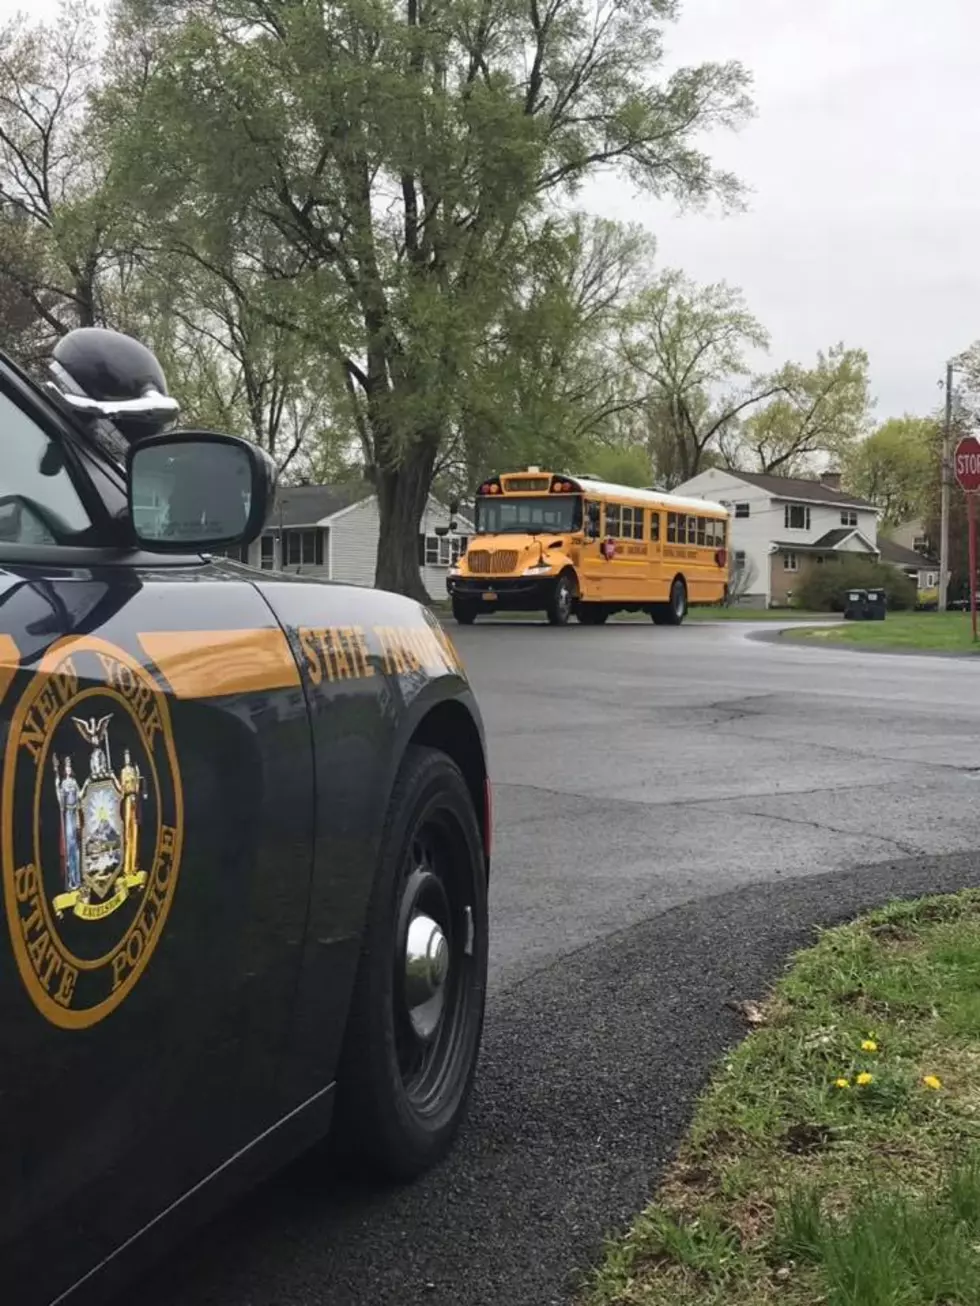 7 Hudson Valley Drivers Illegally Passed School Bus, Police Say